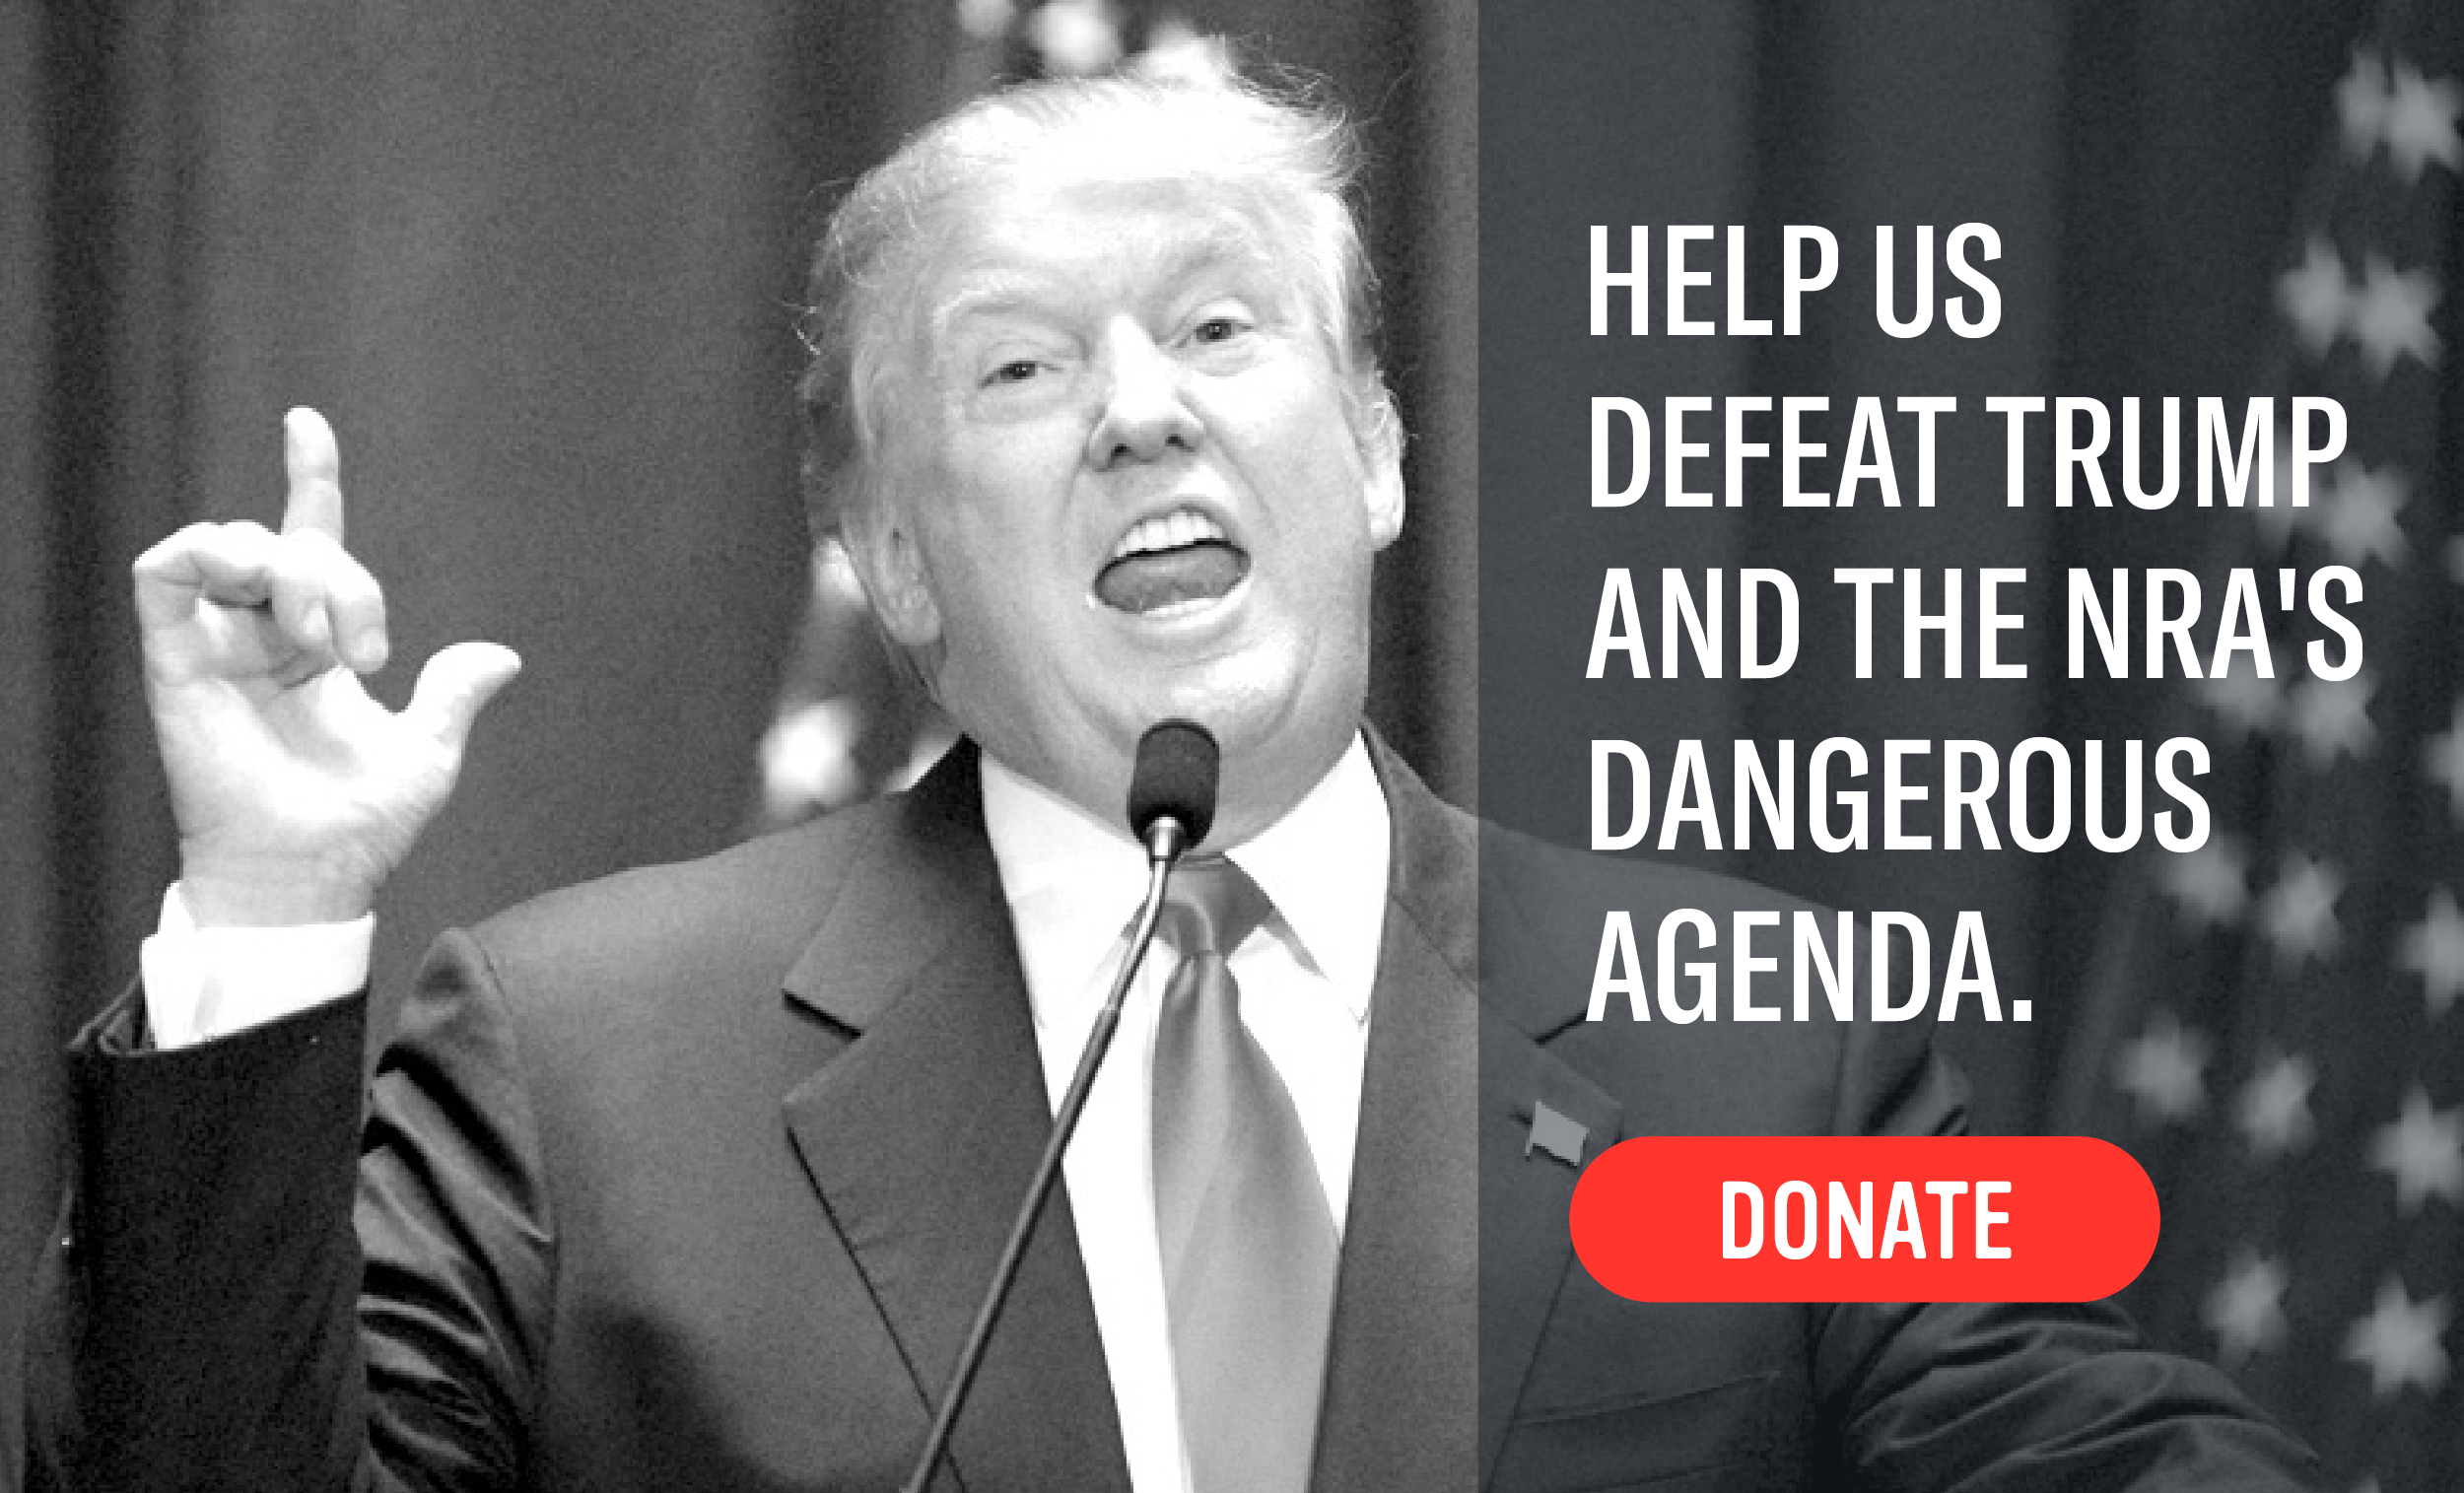 Help us defeat Trump and the NRA's dangerous agenda.